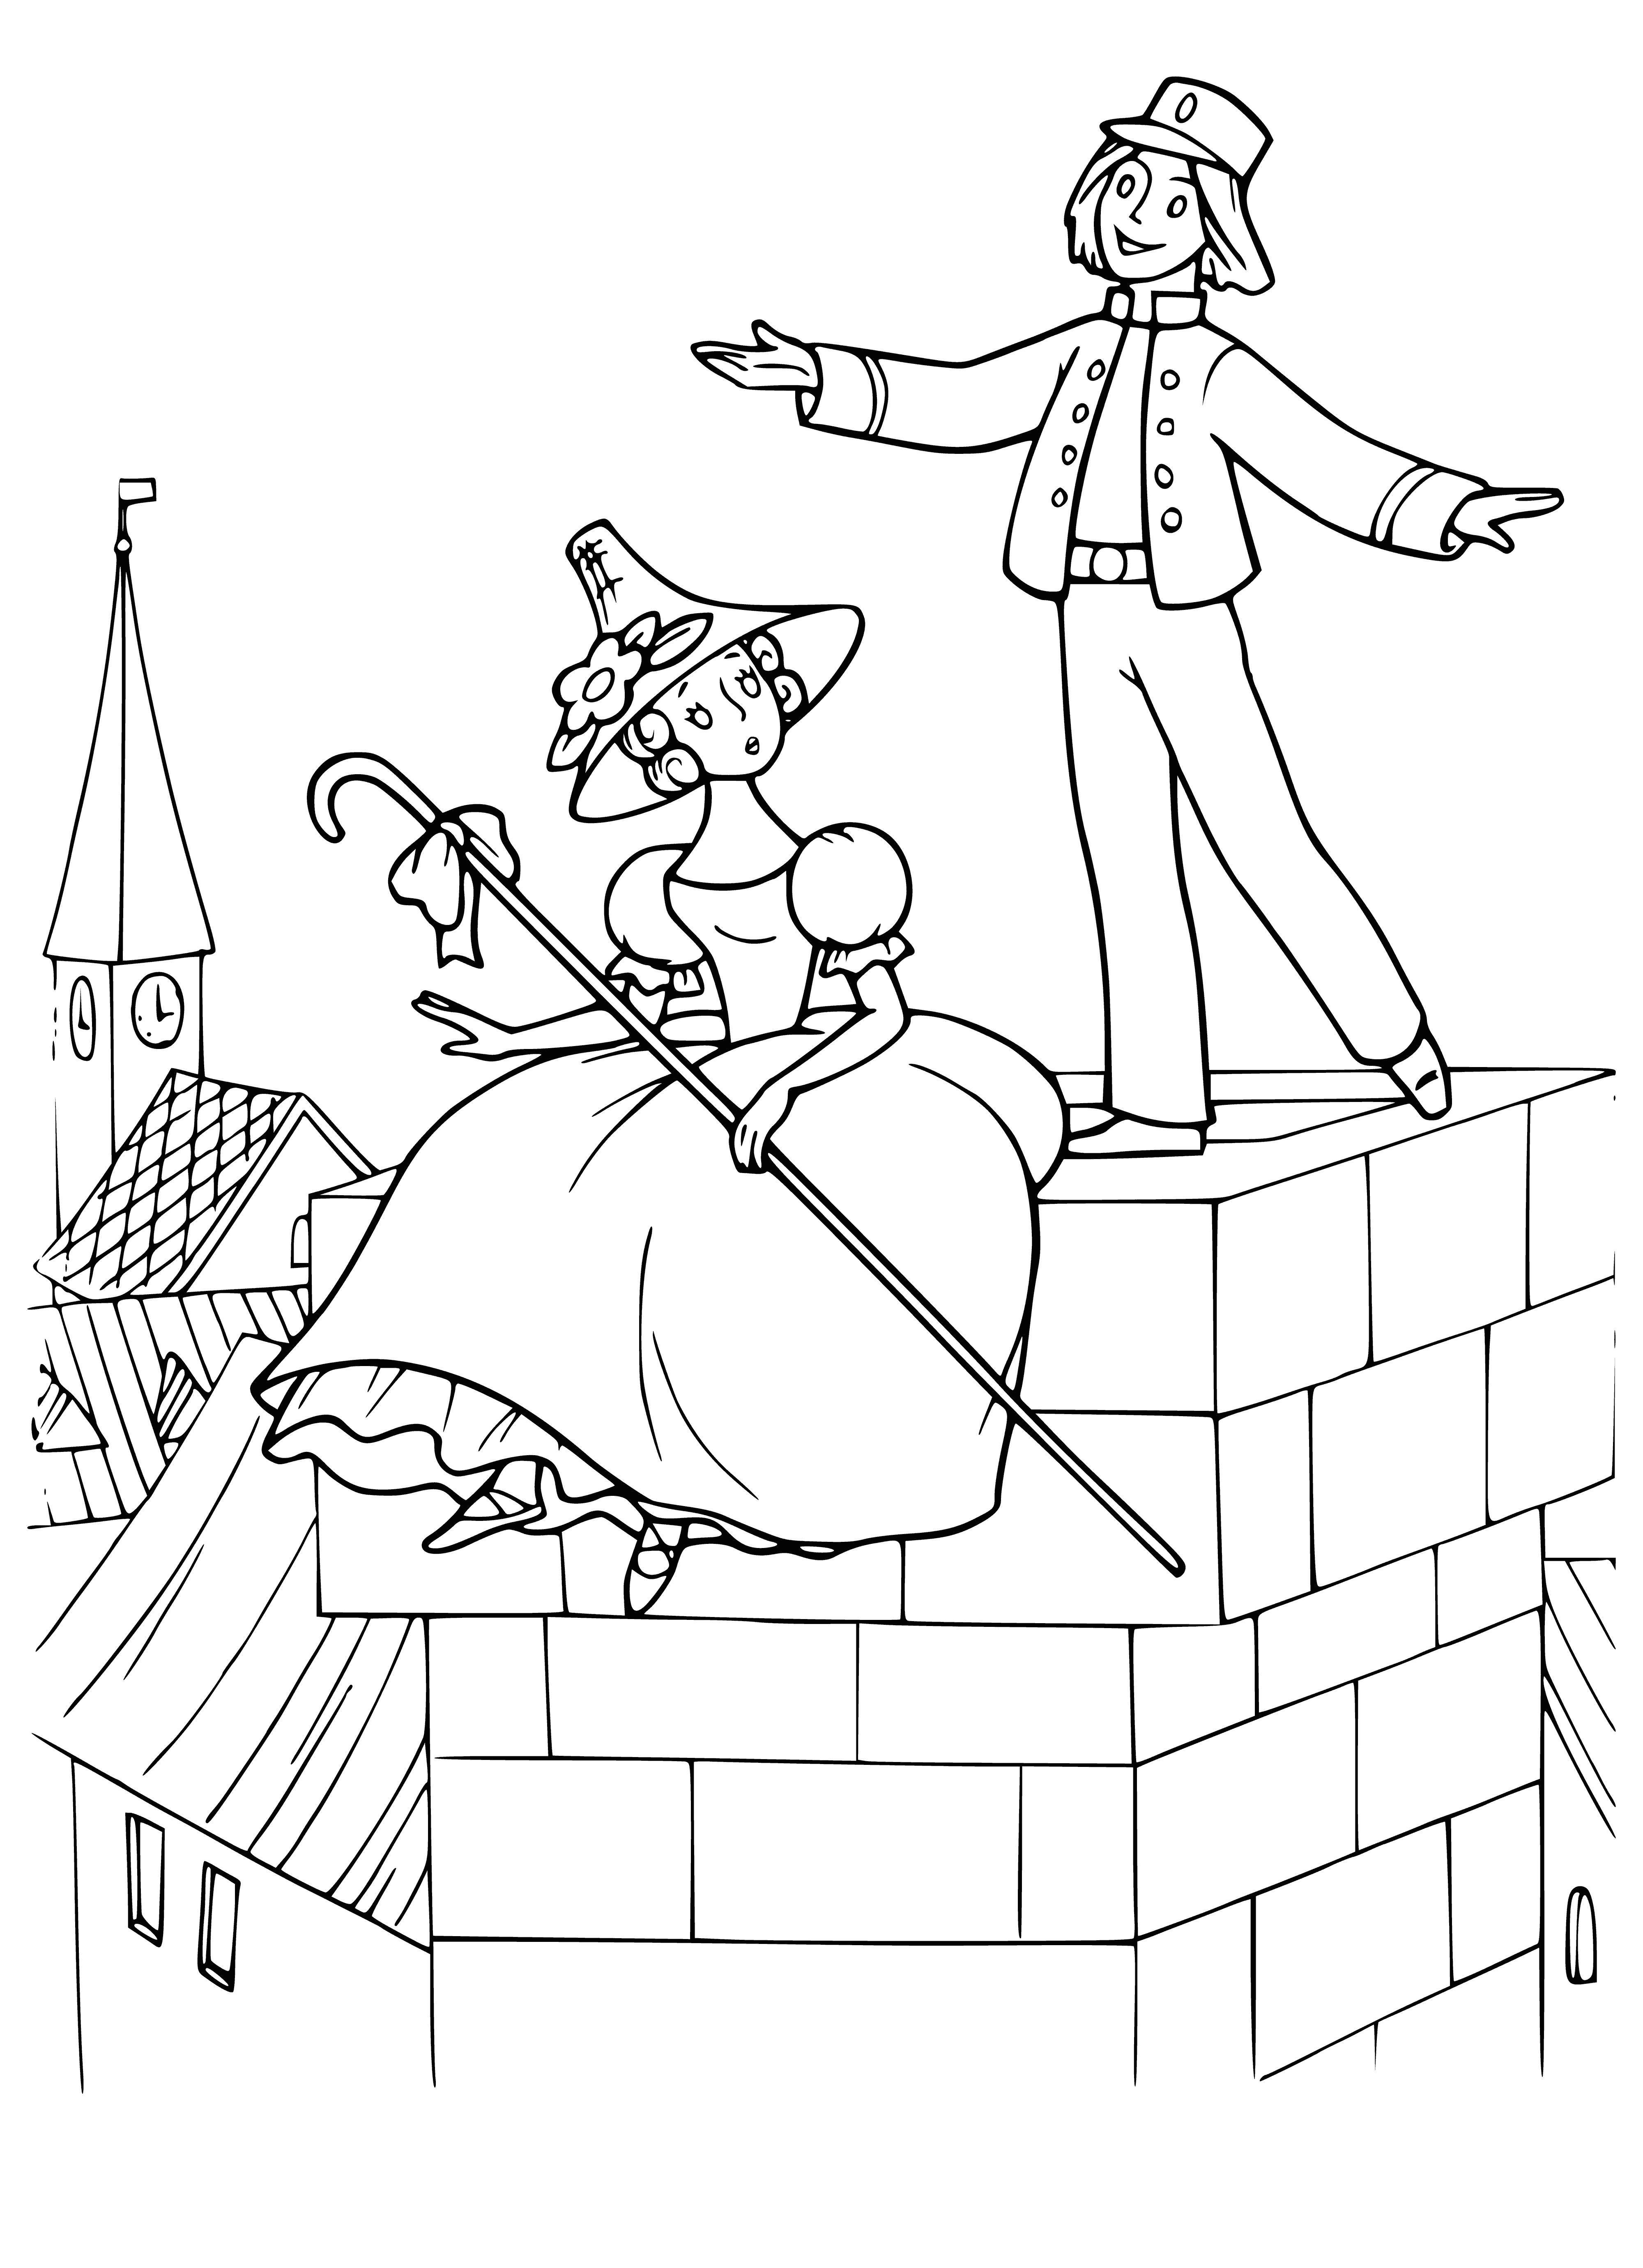 coloring page: Girl & boy happily explore a book filled with words & illustrations while dressed in traditional clothing. #reading #storytime